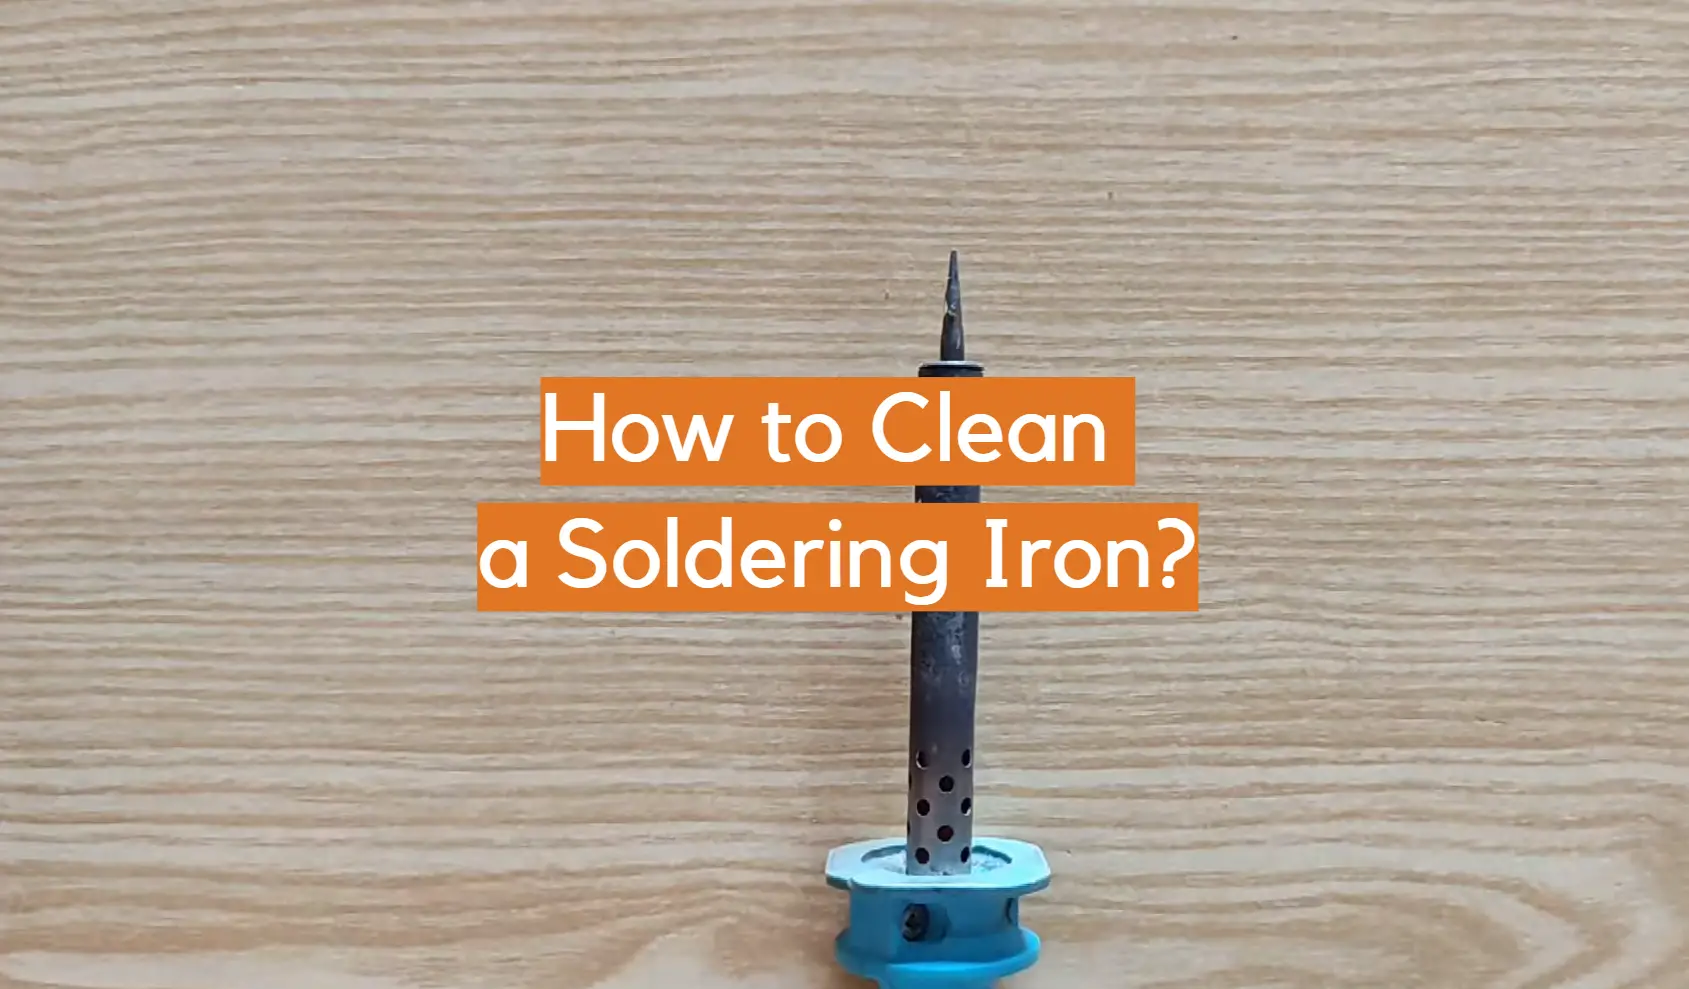 How to Clean a Soldering Iron?